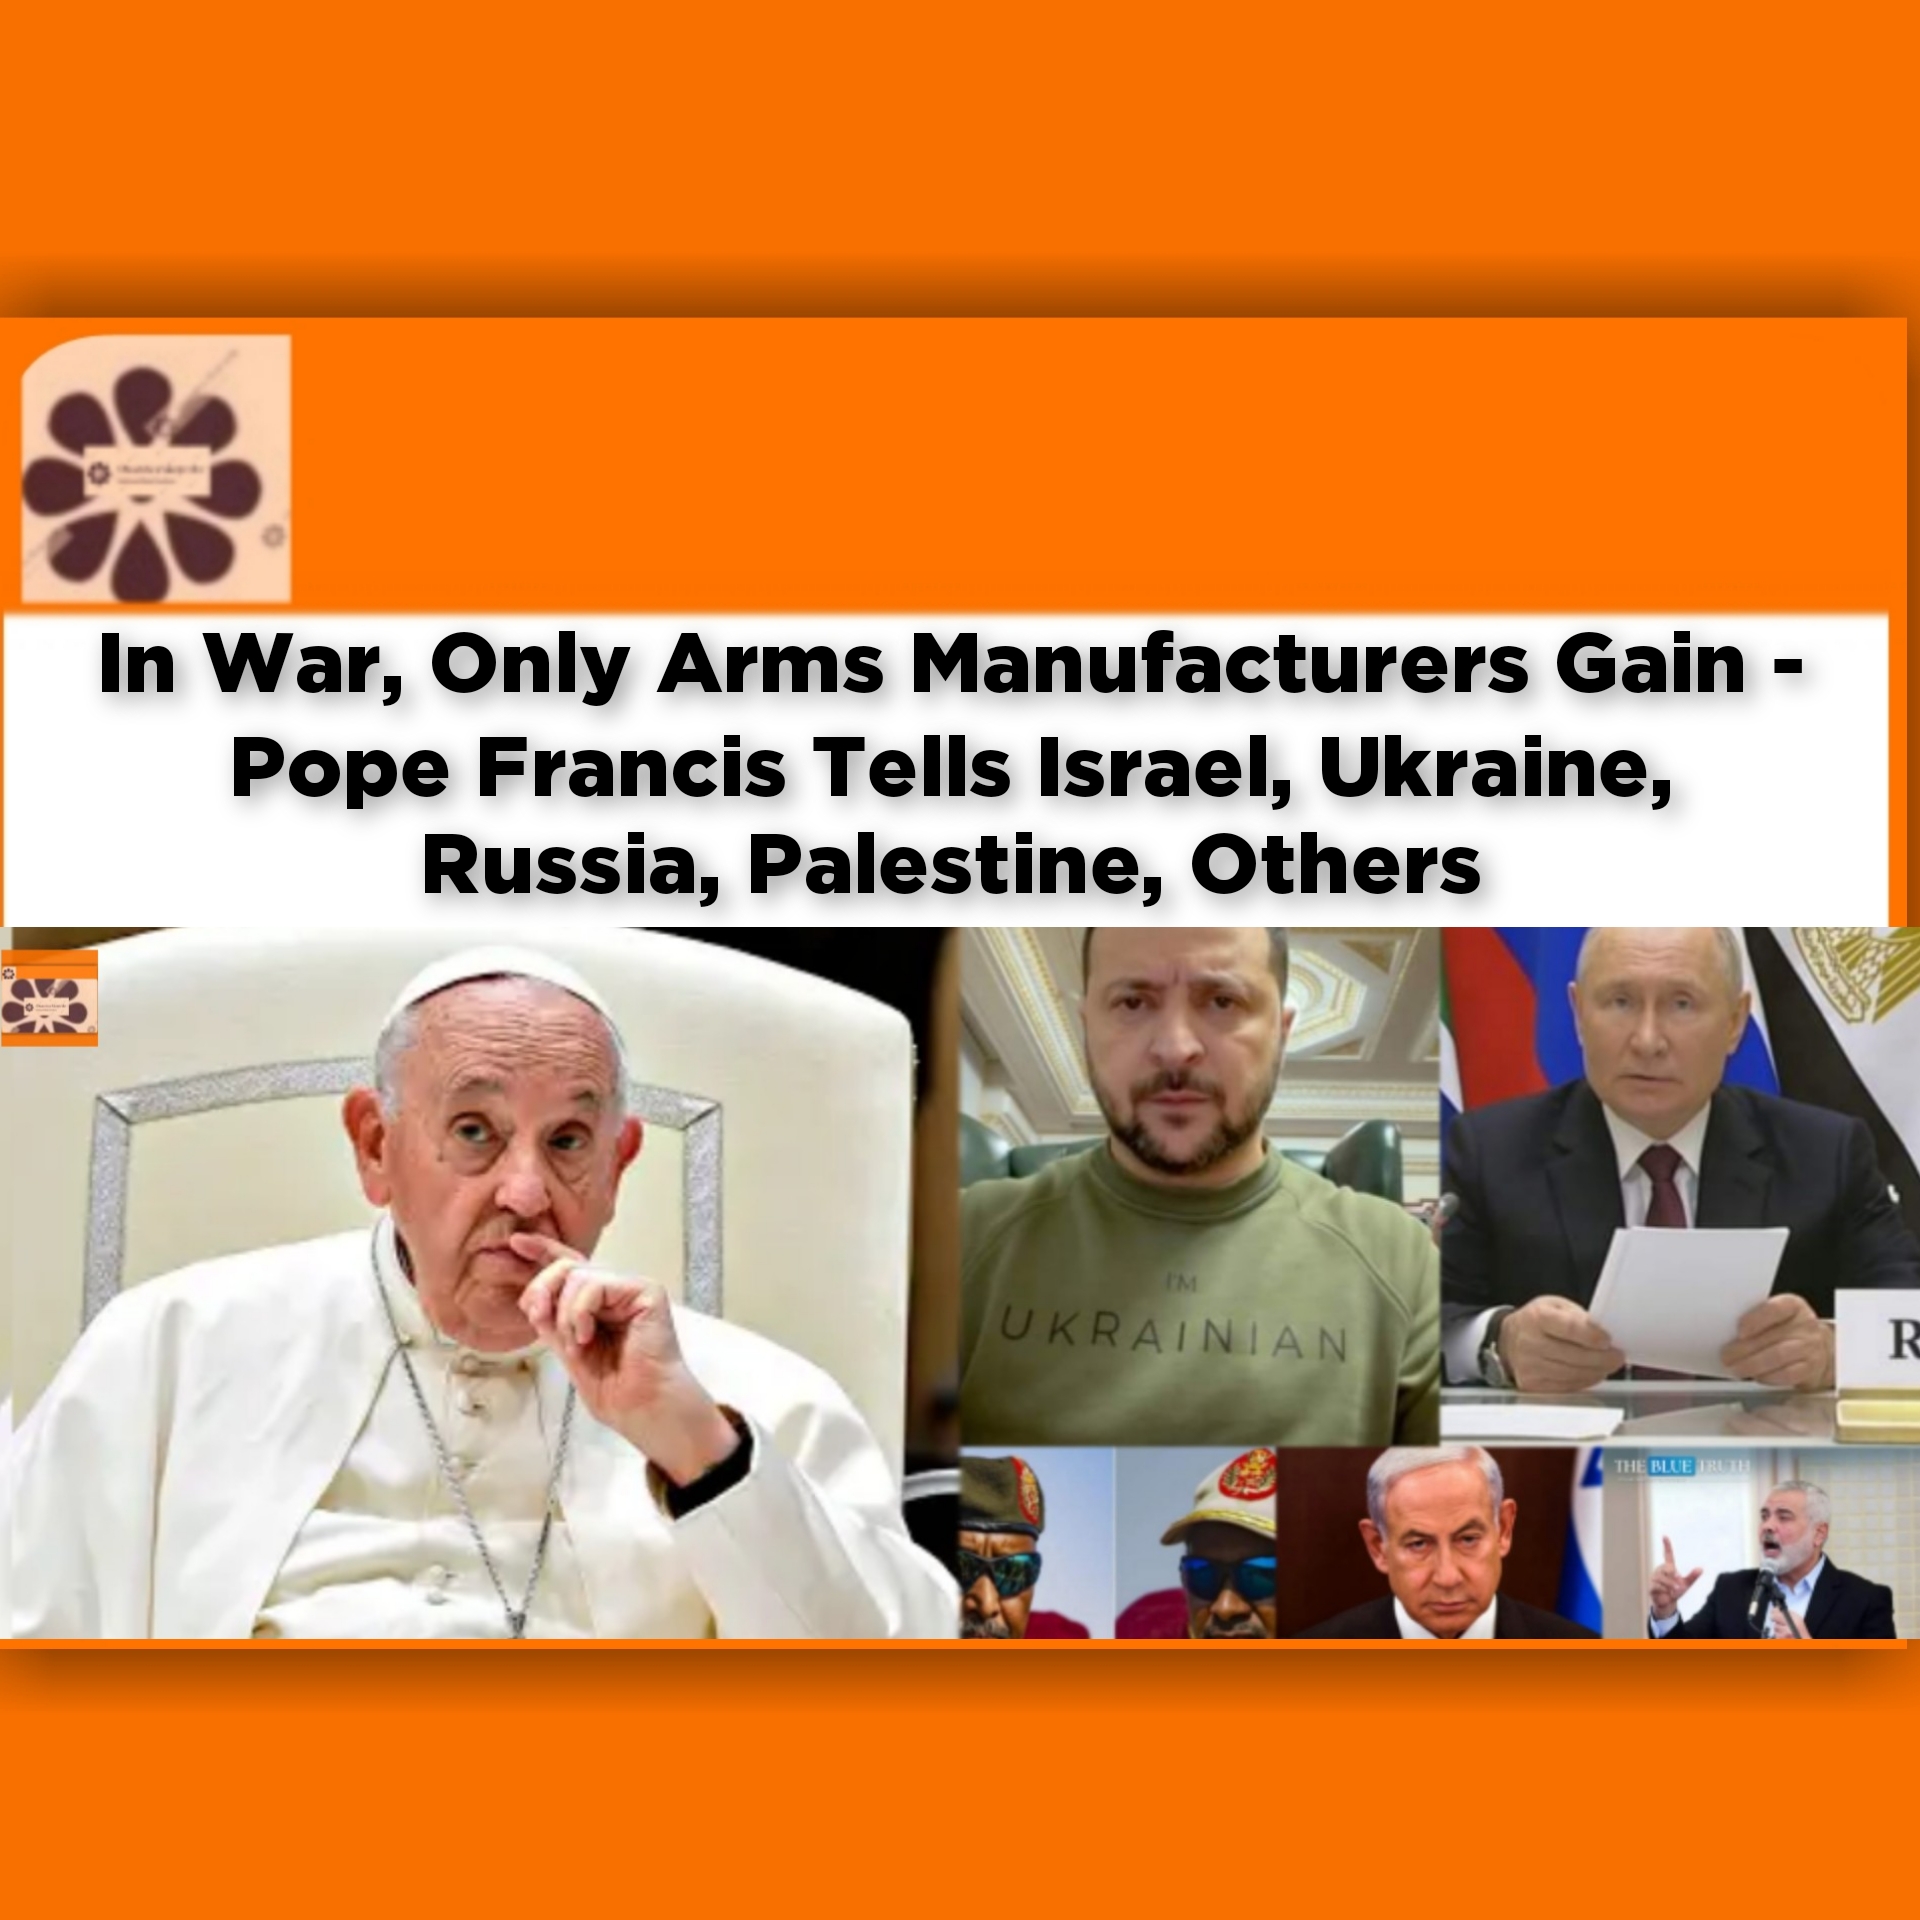 In War, Only Arms Manufacturers Gain - Pope Francis Tells Israel, Ukraine, Russia, Palestine, Others ~ OsazuwaAkonedo #Governor